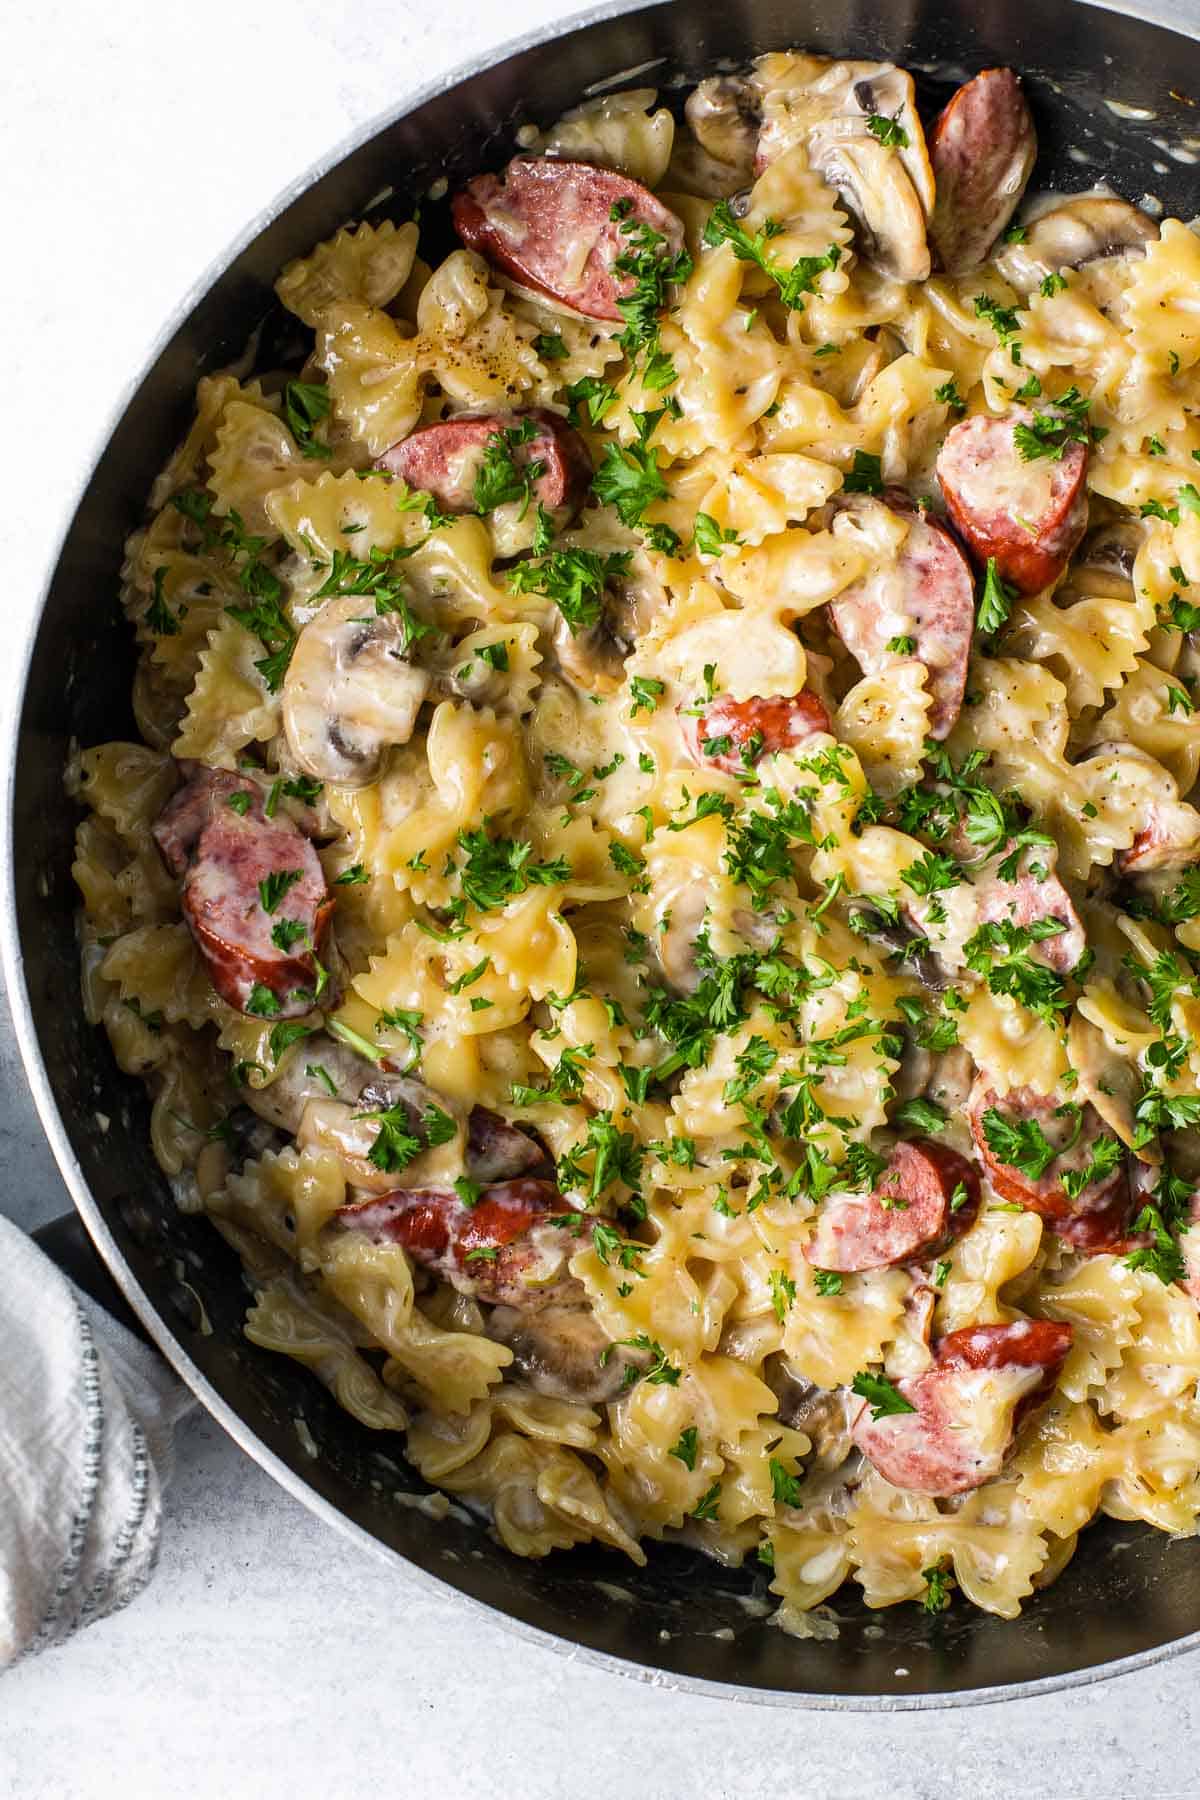 skillet with a creamy pasta dish sprinkled with parsley